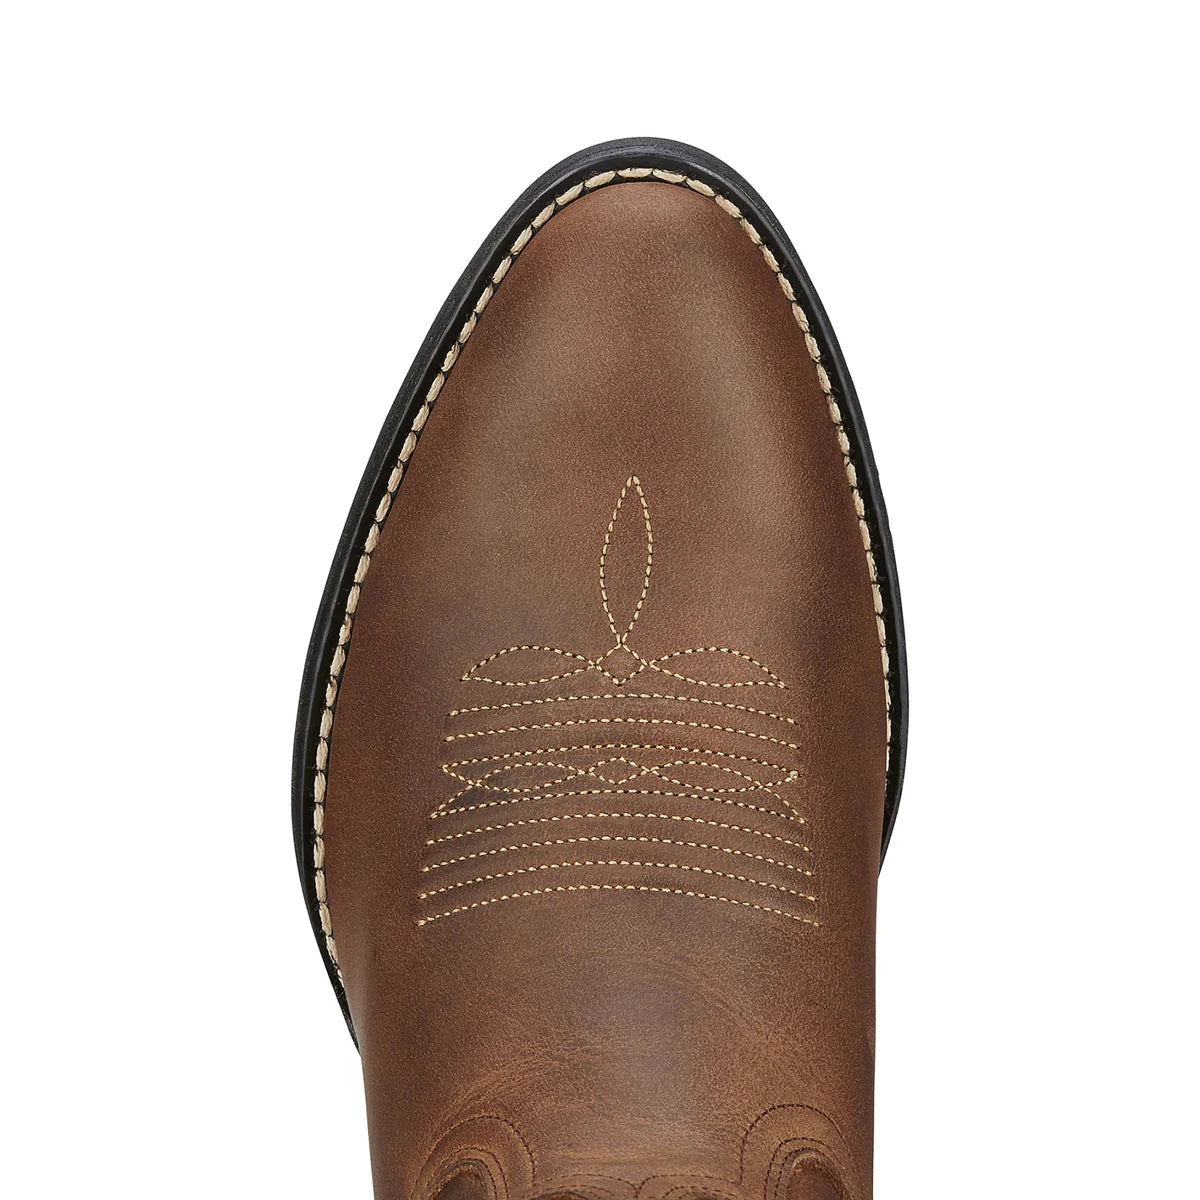 Ariat Wms Heritage Western R Toe - Mothers Day Sale